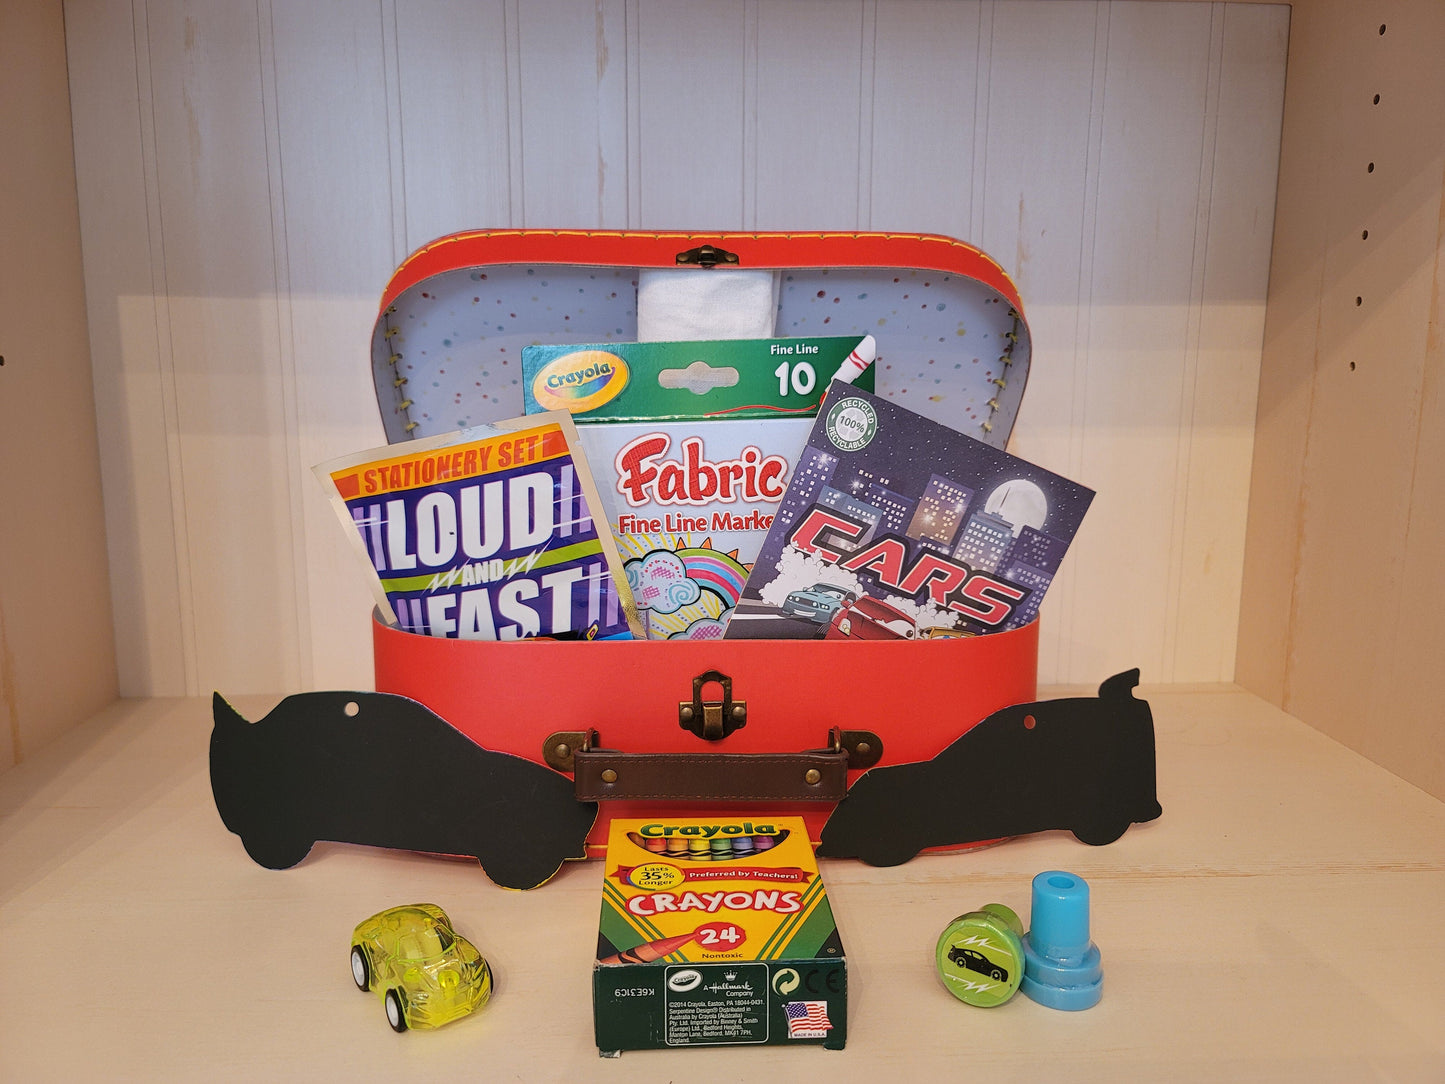 AUTOMOBILE Themed Kid Activity Set - Arts & Crafts, Games, and Activities for recommended ages 3 - 10 in reusable gift box